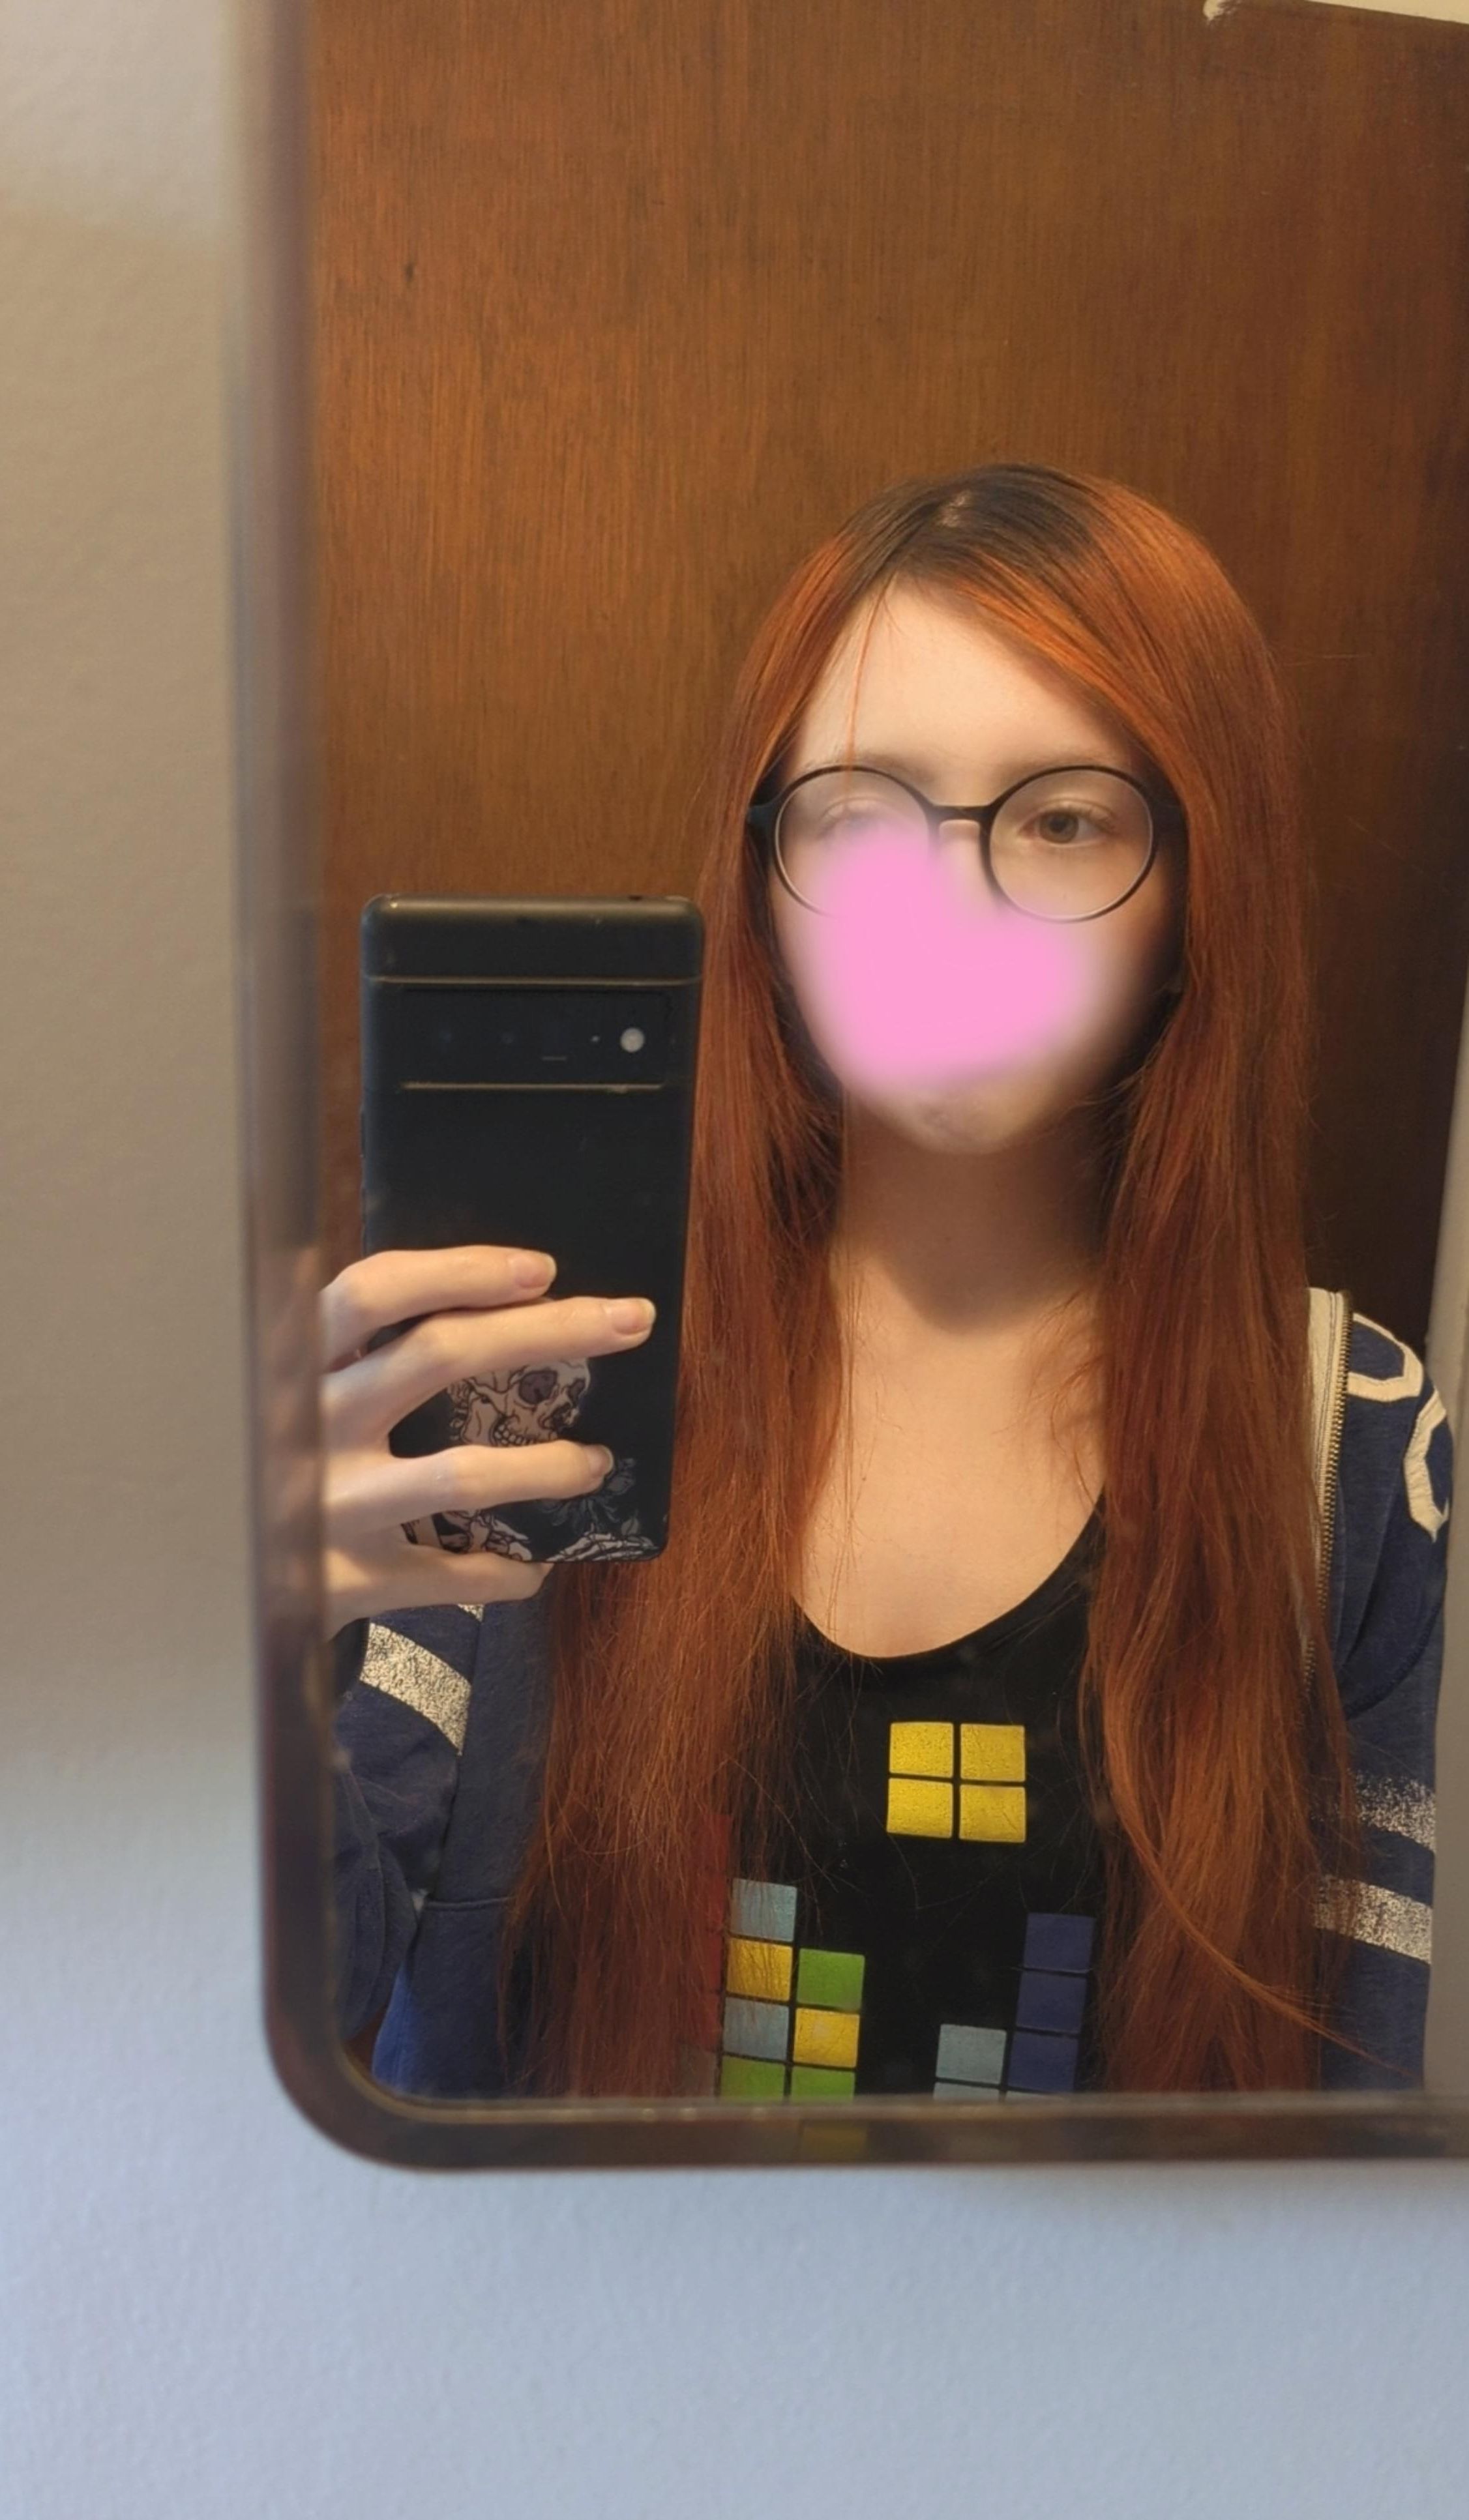 Should I Get Curtain Bangs? I Feel Like My Hair Is Really Boring And Flat,  I Never Know What To Do With It. I Just Have It Tied Back All The Time (View 12 of 18)